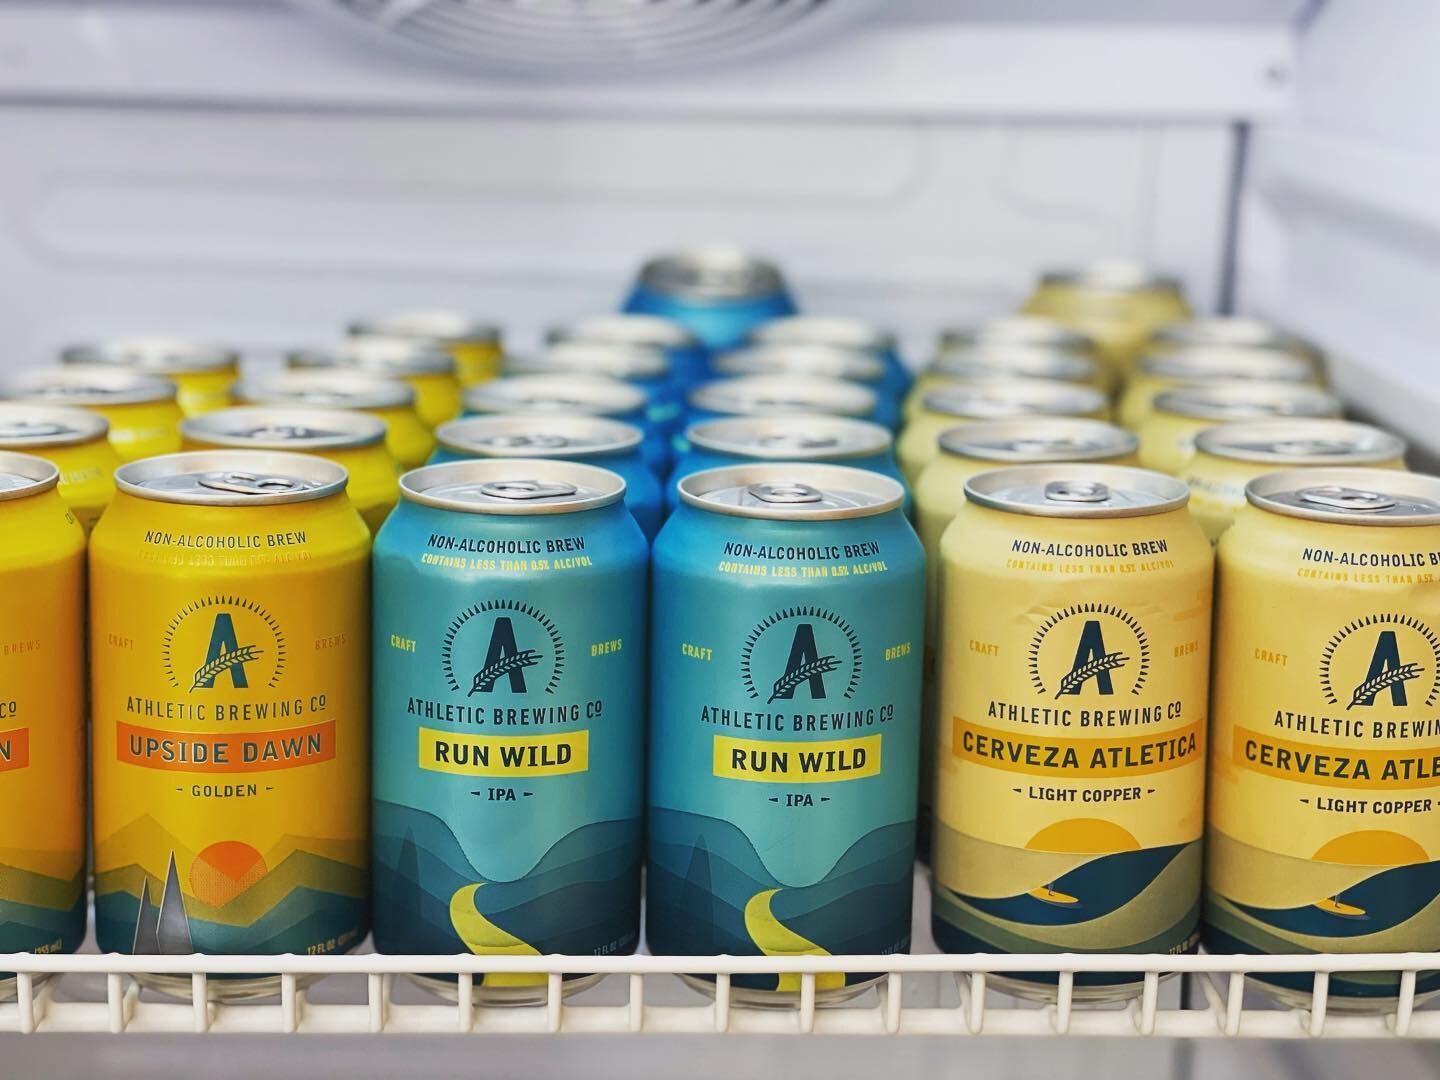 These @athleticbrewing non-alcoholic beers are a great way to compliment our delicious sandwiches, try one today!